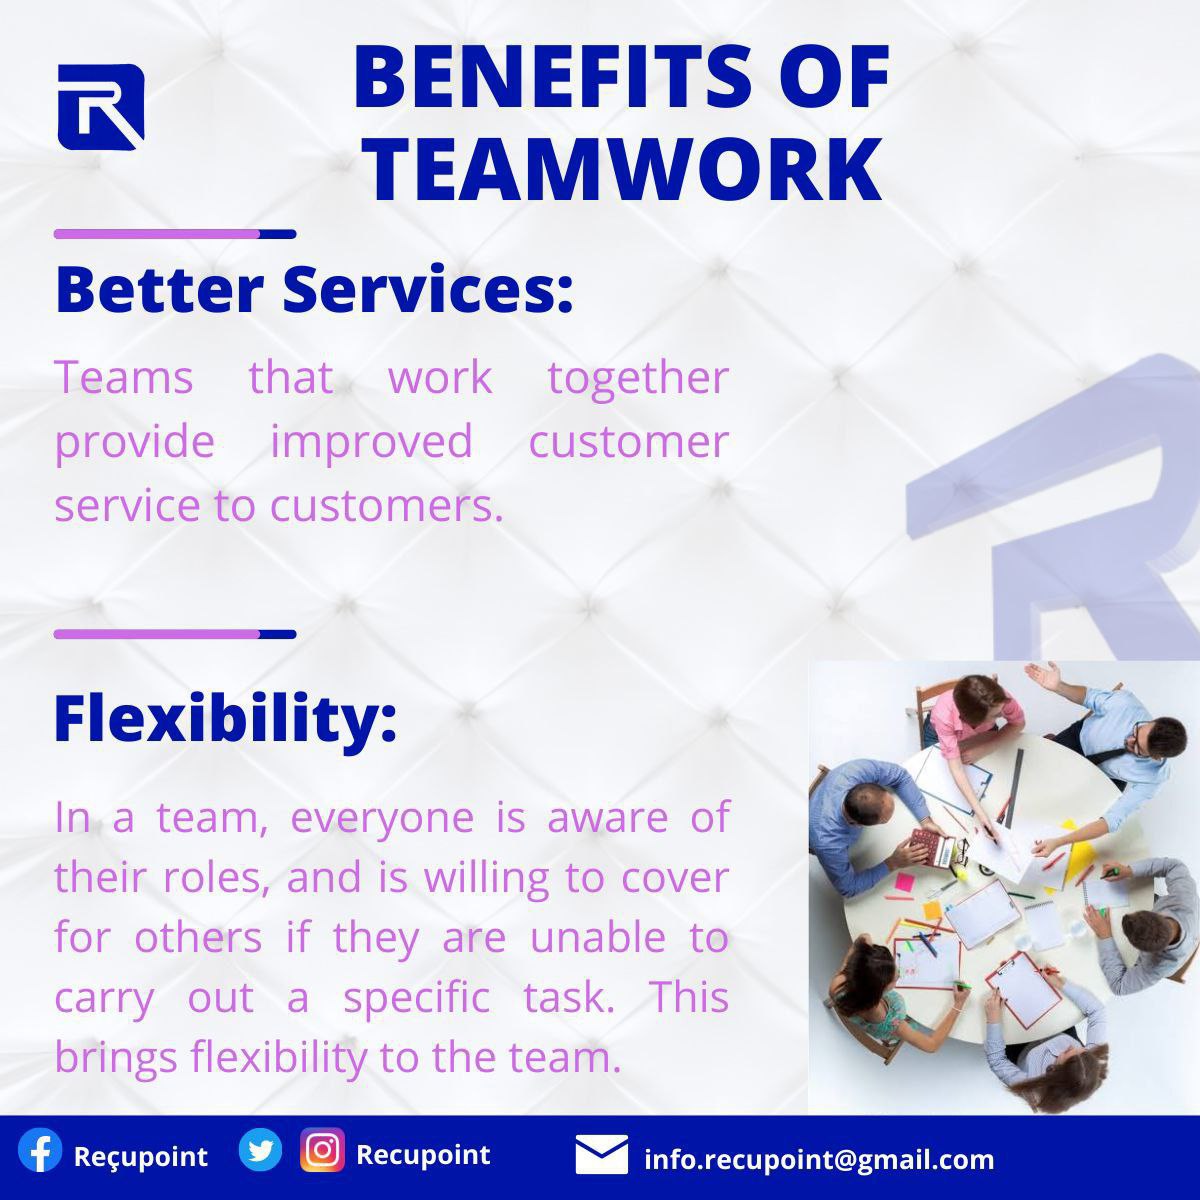 Generally, teamwork when done right drives business growth, development, and achievements by tapping into each team member's strength.

Here are some keys to team success and some benefits of teamwork.

@NgSidehustle #digitalskill #startups #techcreatives